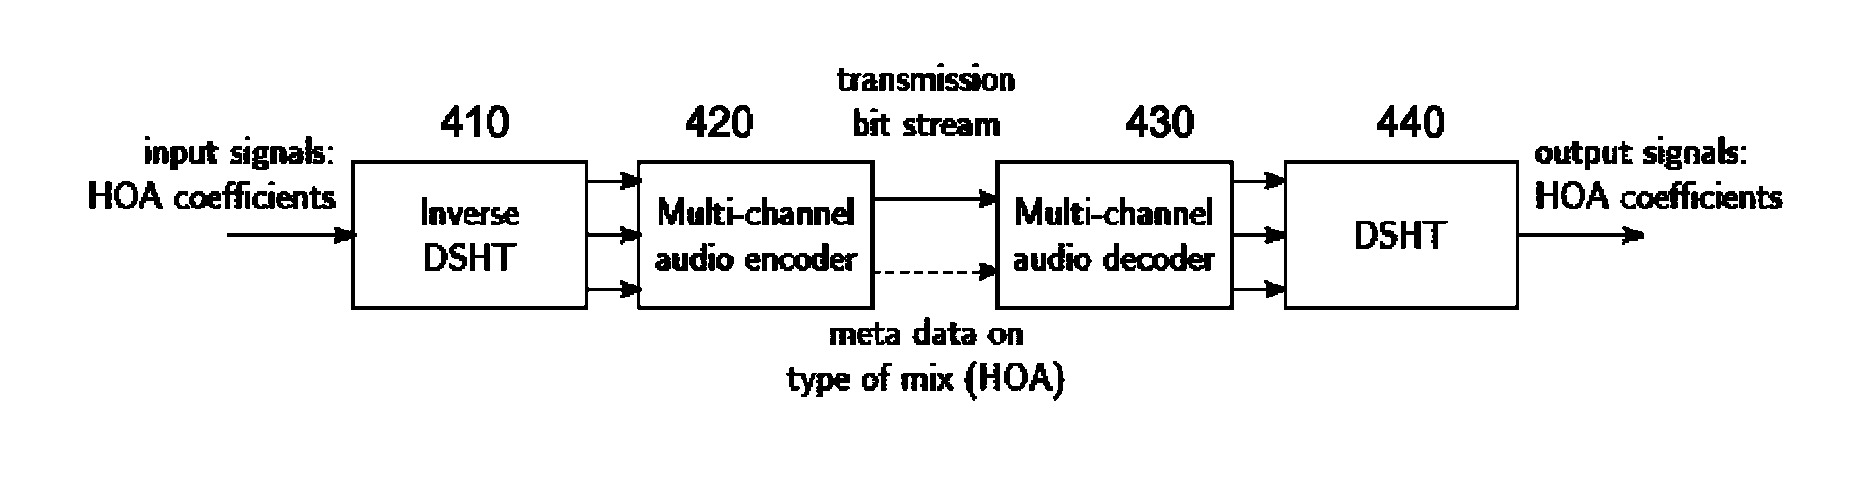 Method and device for improving the rendering of multi-channel audio signals